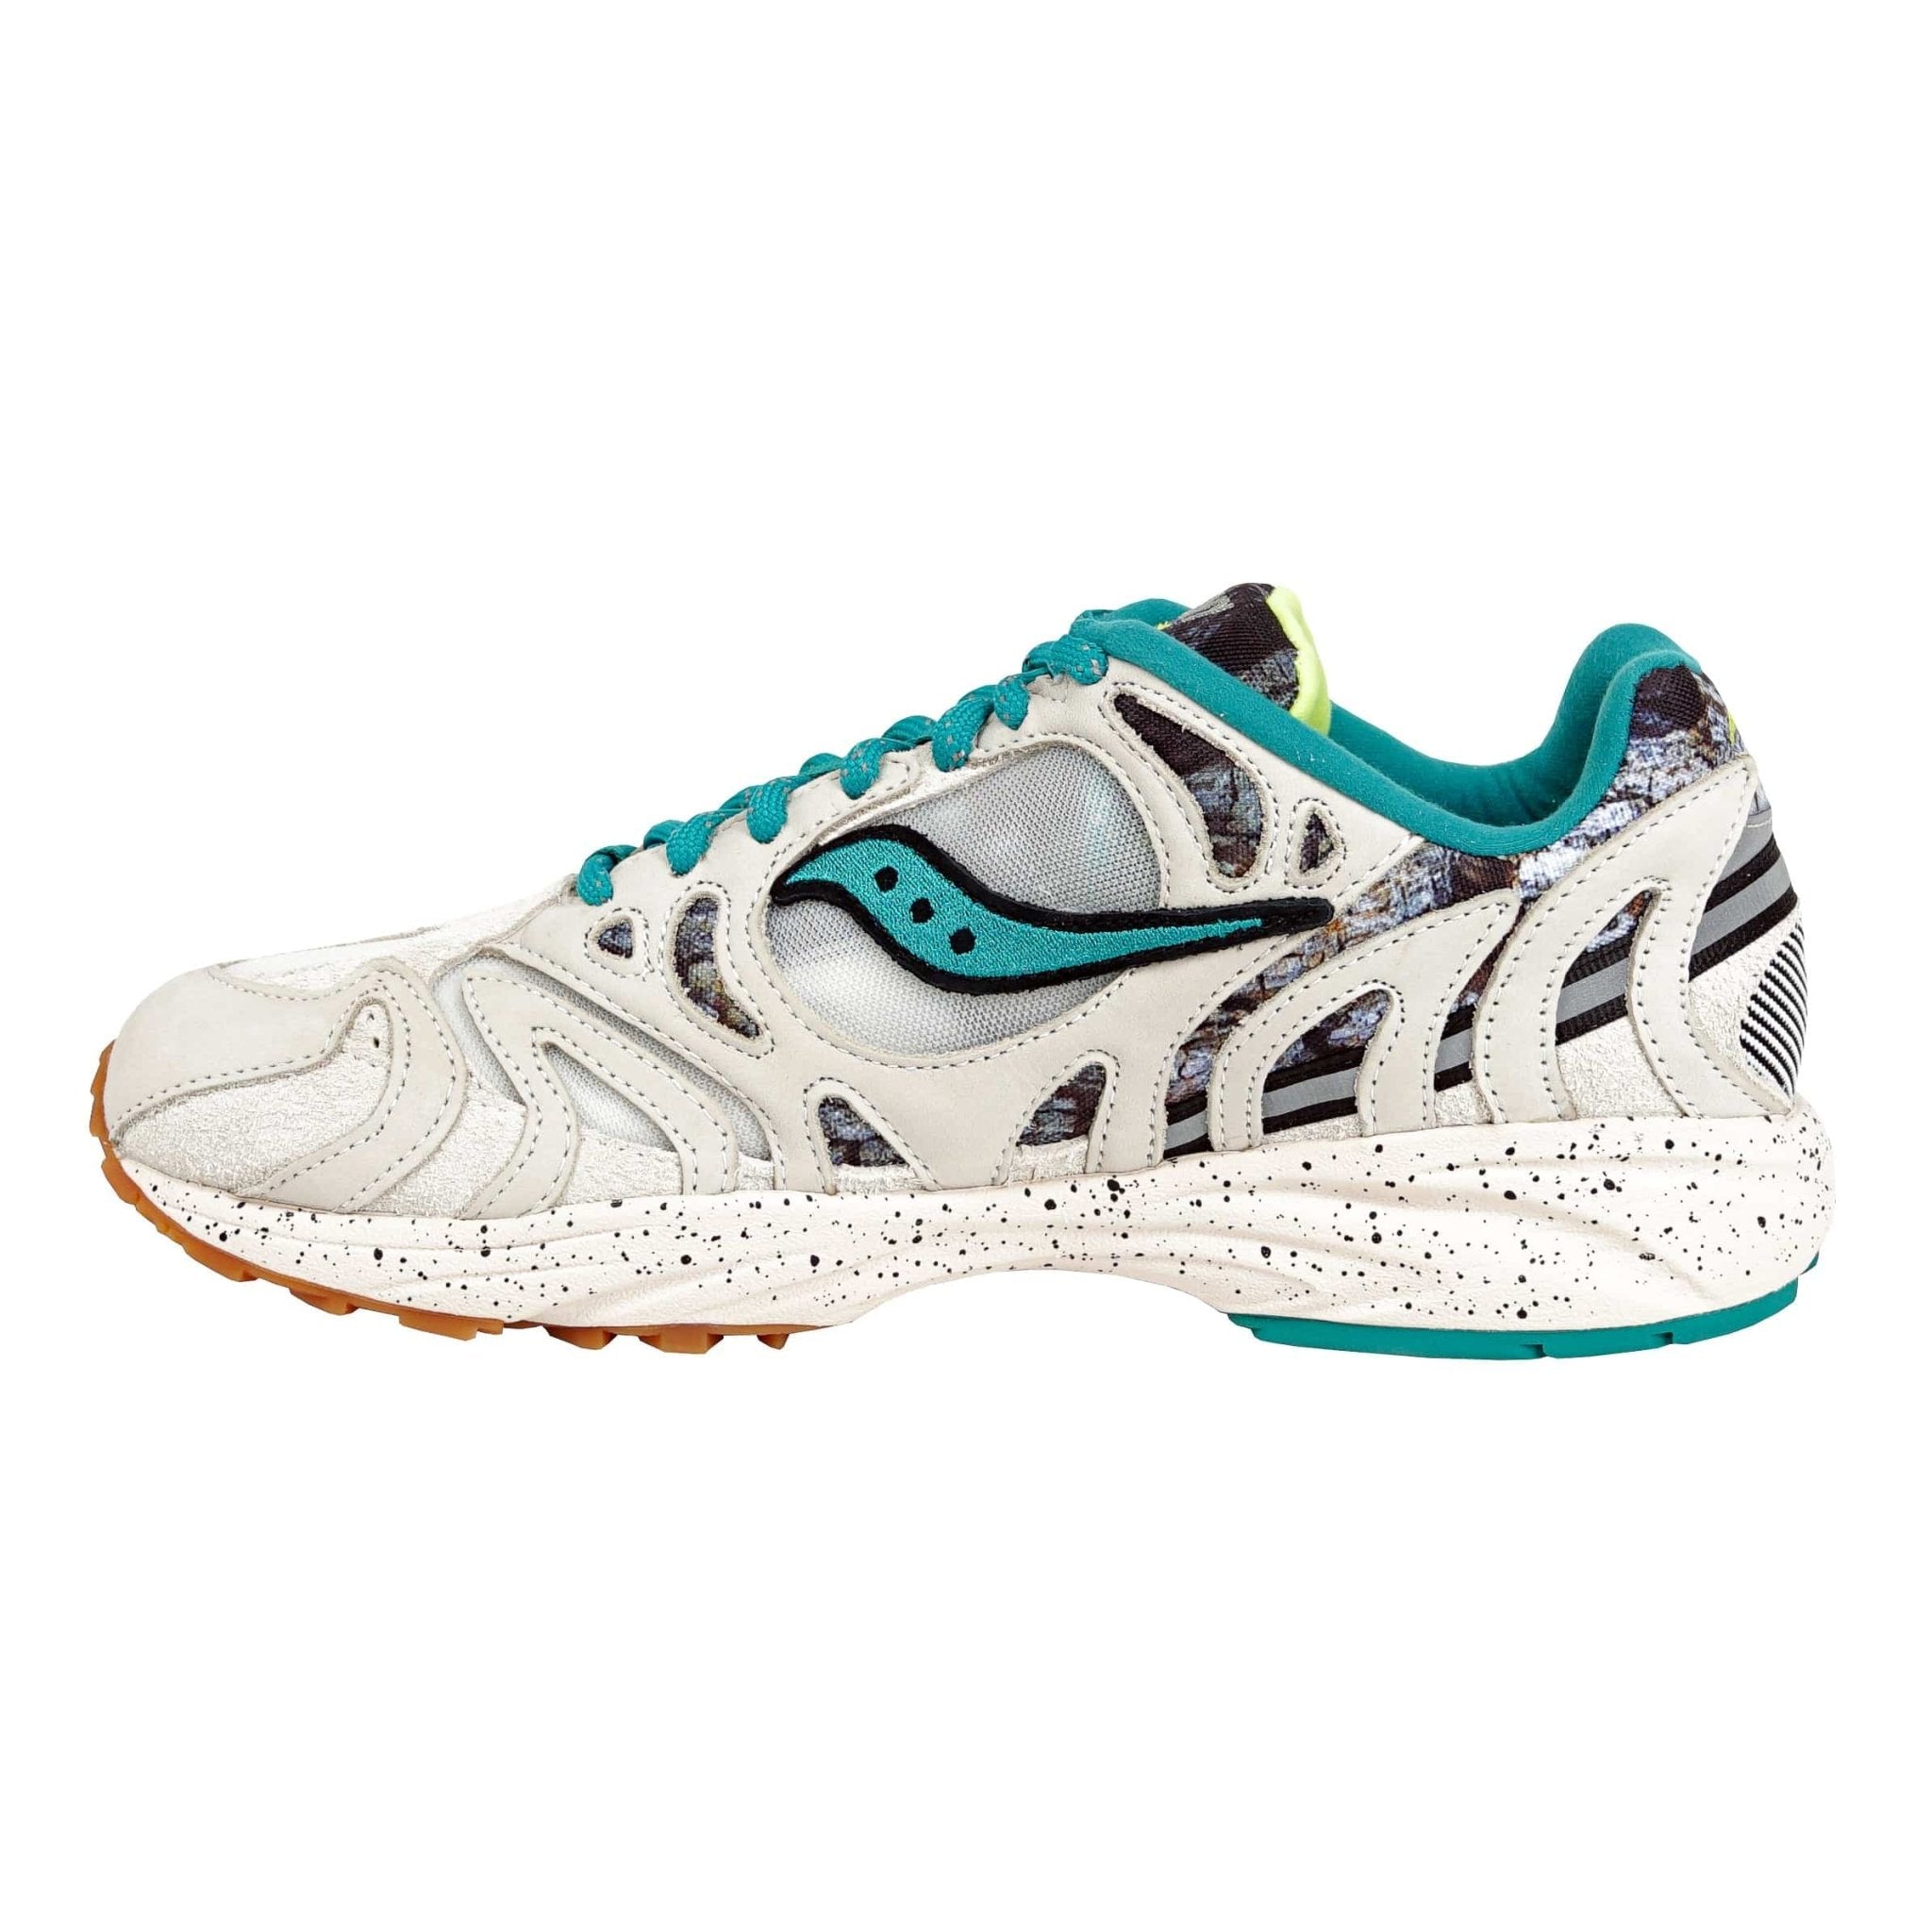 Grid Azura 2000 in creme and blue - Saucony - State Of Flux